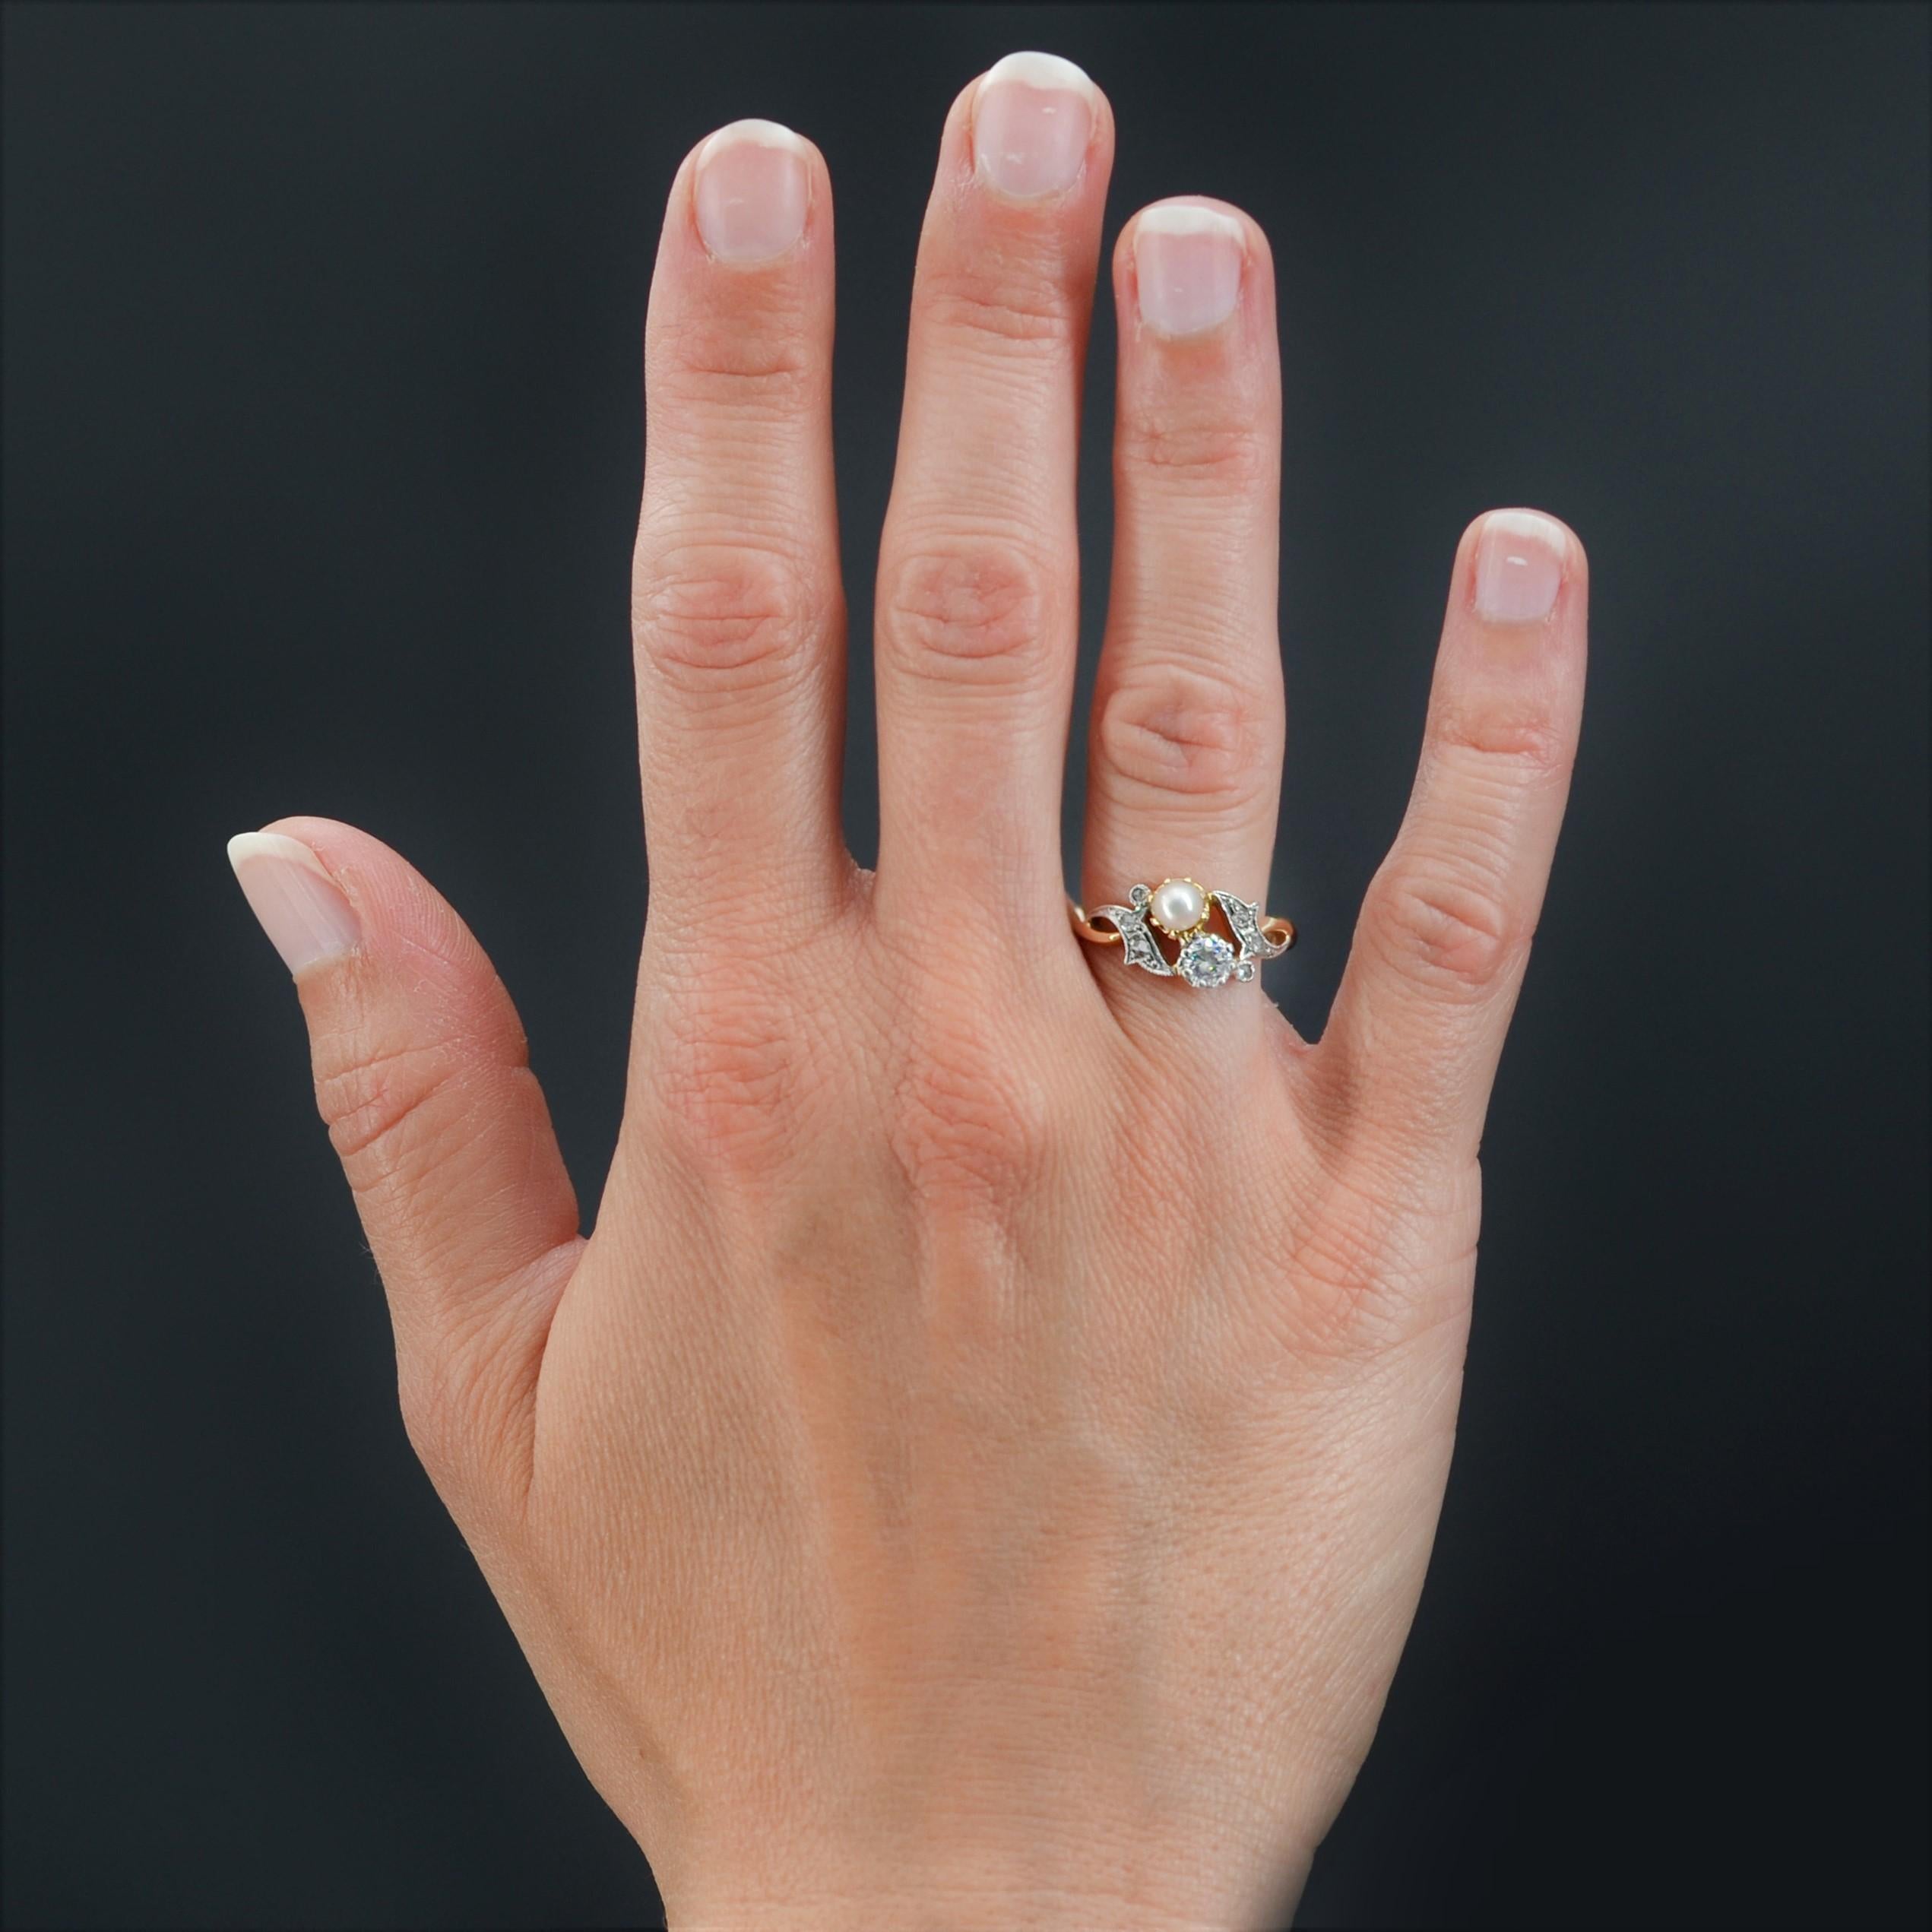 Ring in 18 karat yellow gold.
Charming antique you and me ring, it is set with claws on its top, of a brilliant- cut diamond and a small pearly white pearl. On either side, a cornucopia pattern gives the start of the ring and is set with 2x3